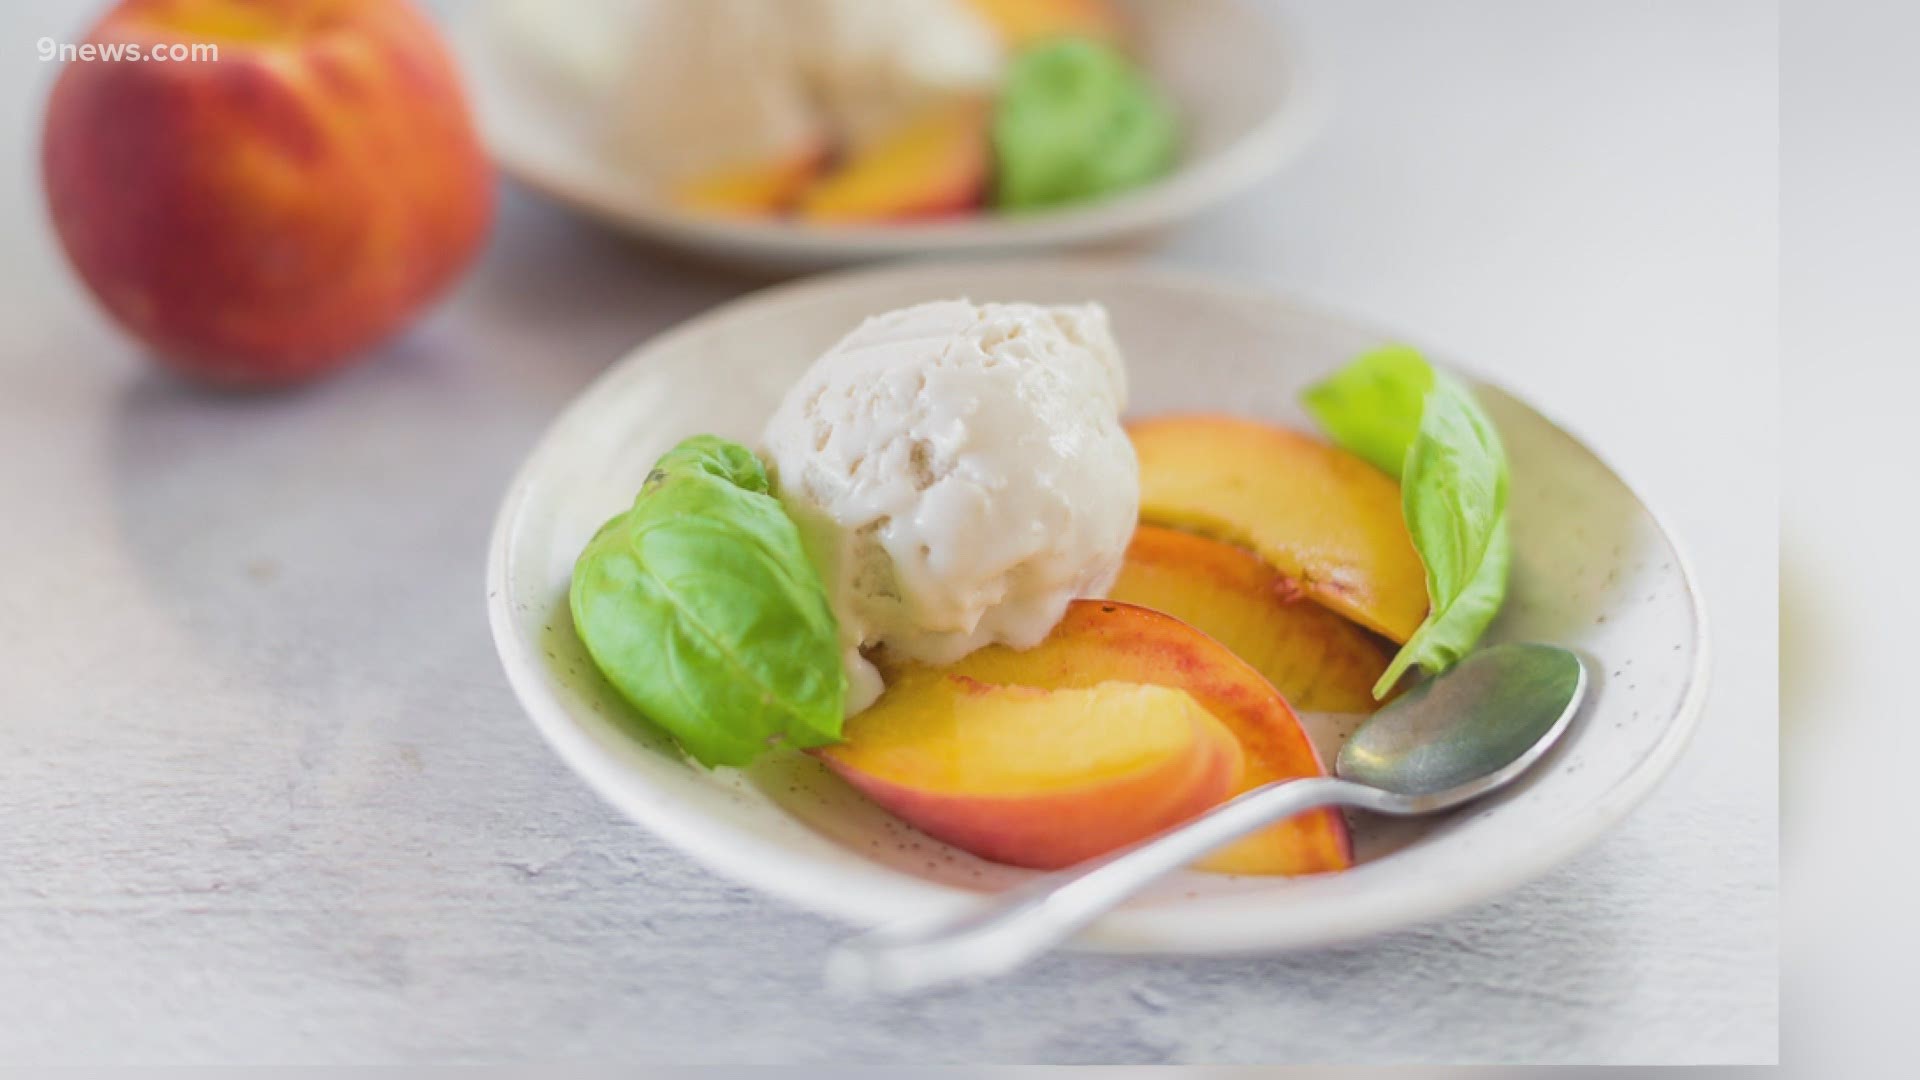 Nutritionist Malena Perdomo shares three fruit dessert recipes that art perfect for summer.